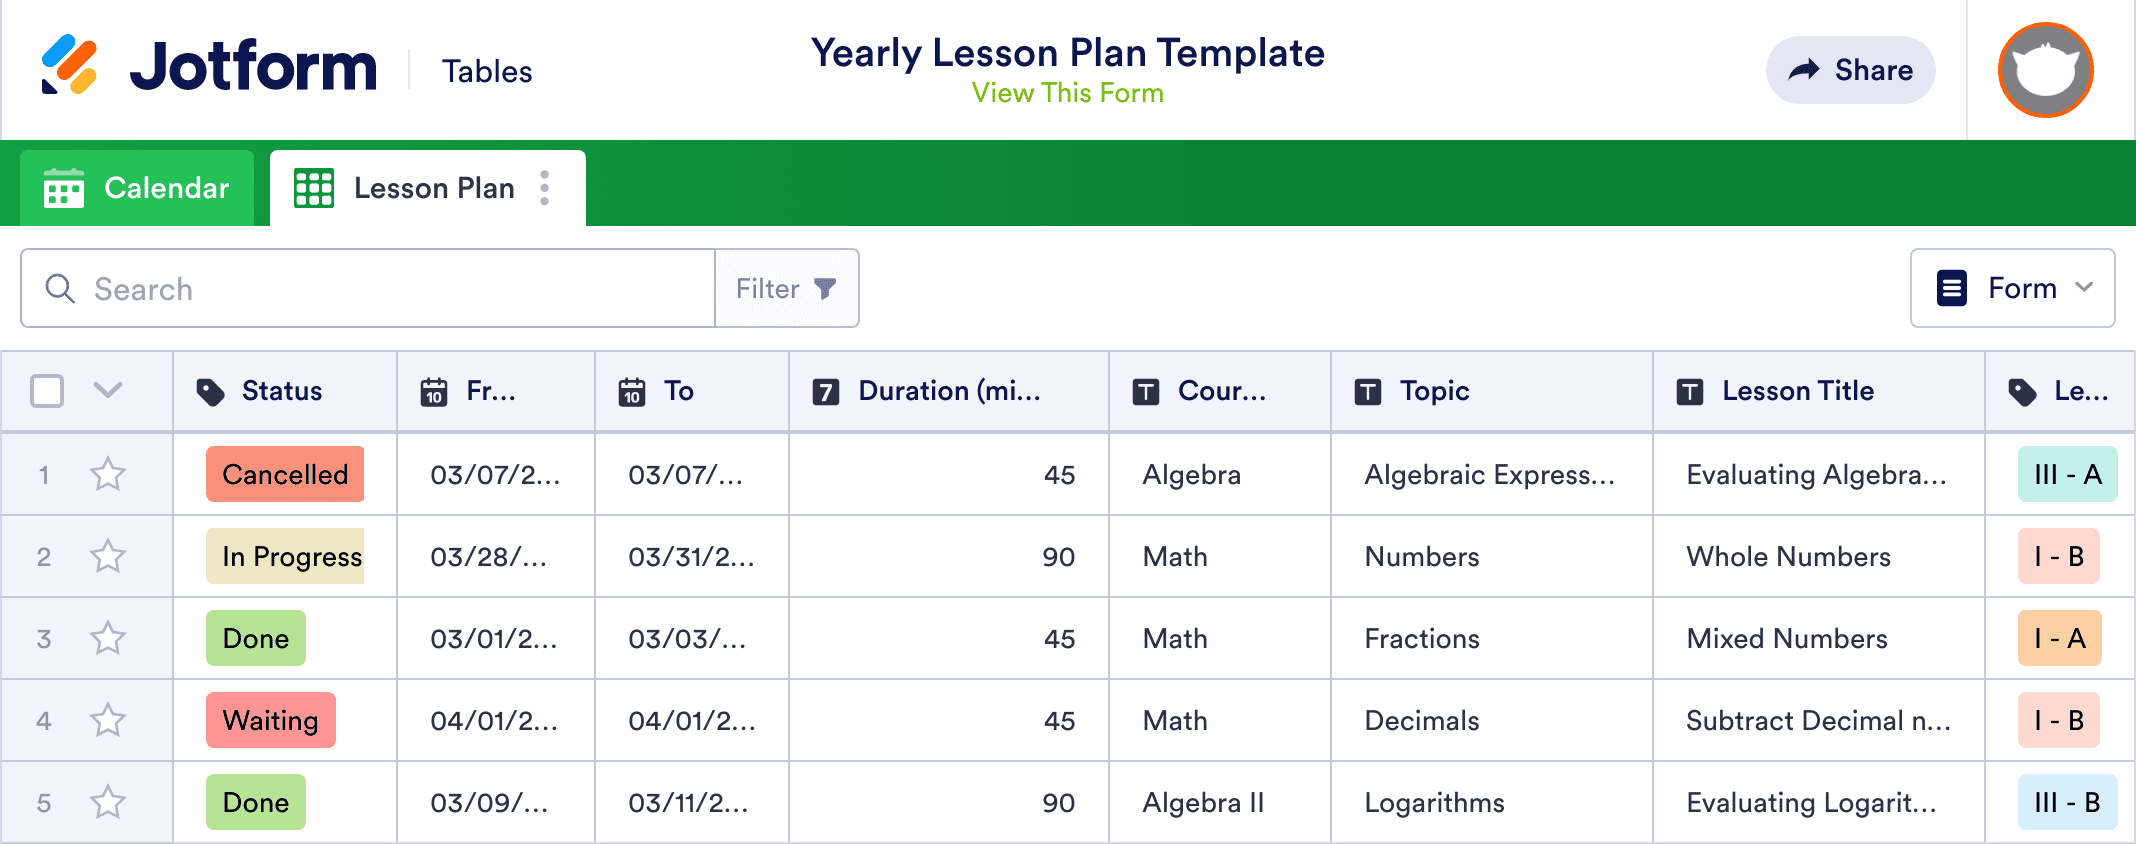 Yearly Lesson Plan Template | Jotform Tables